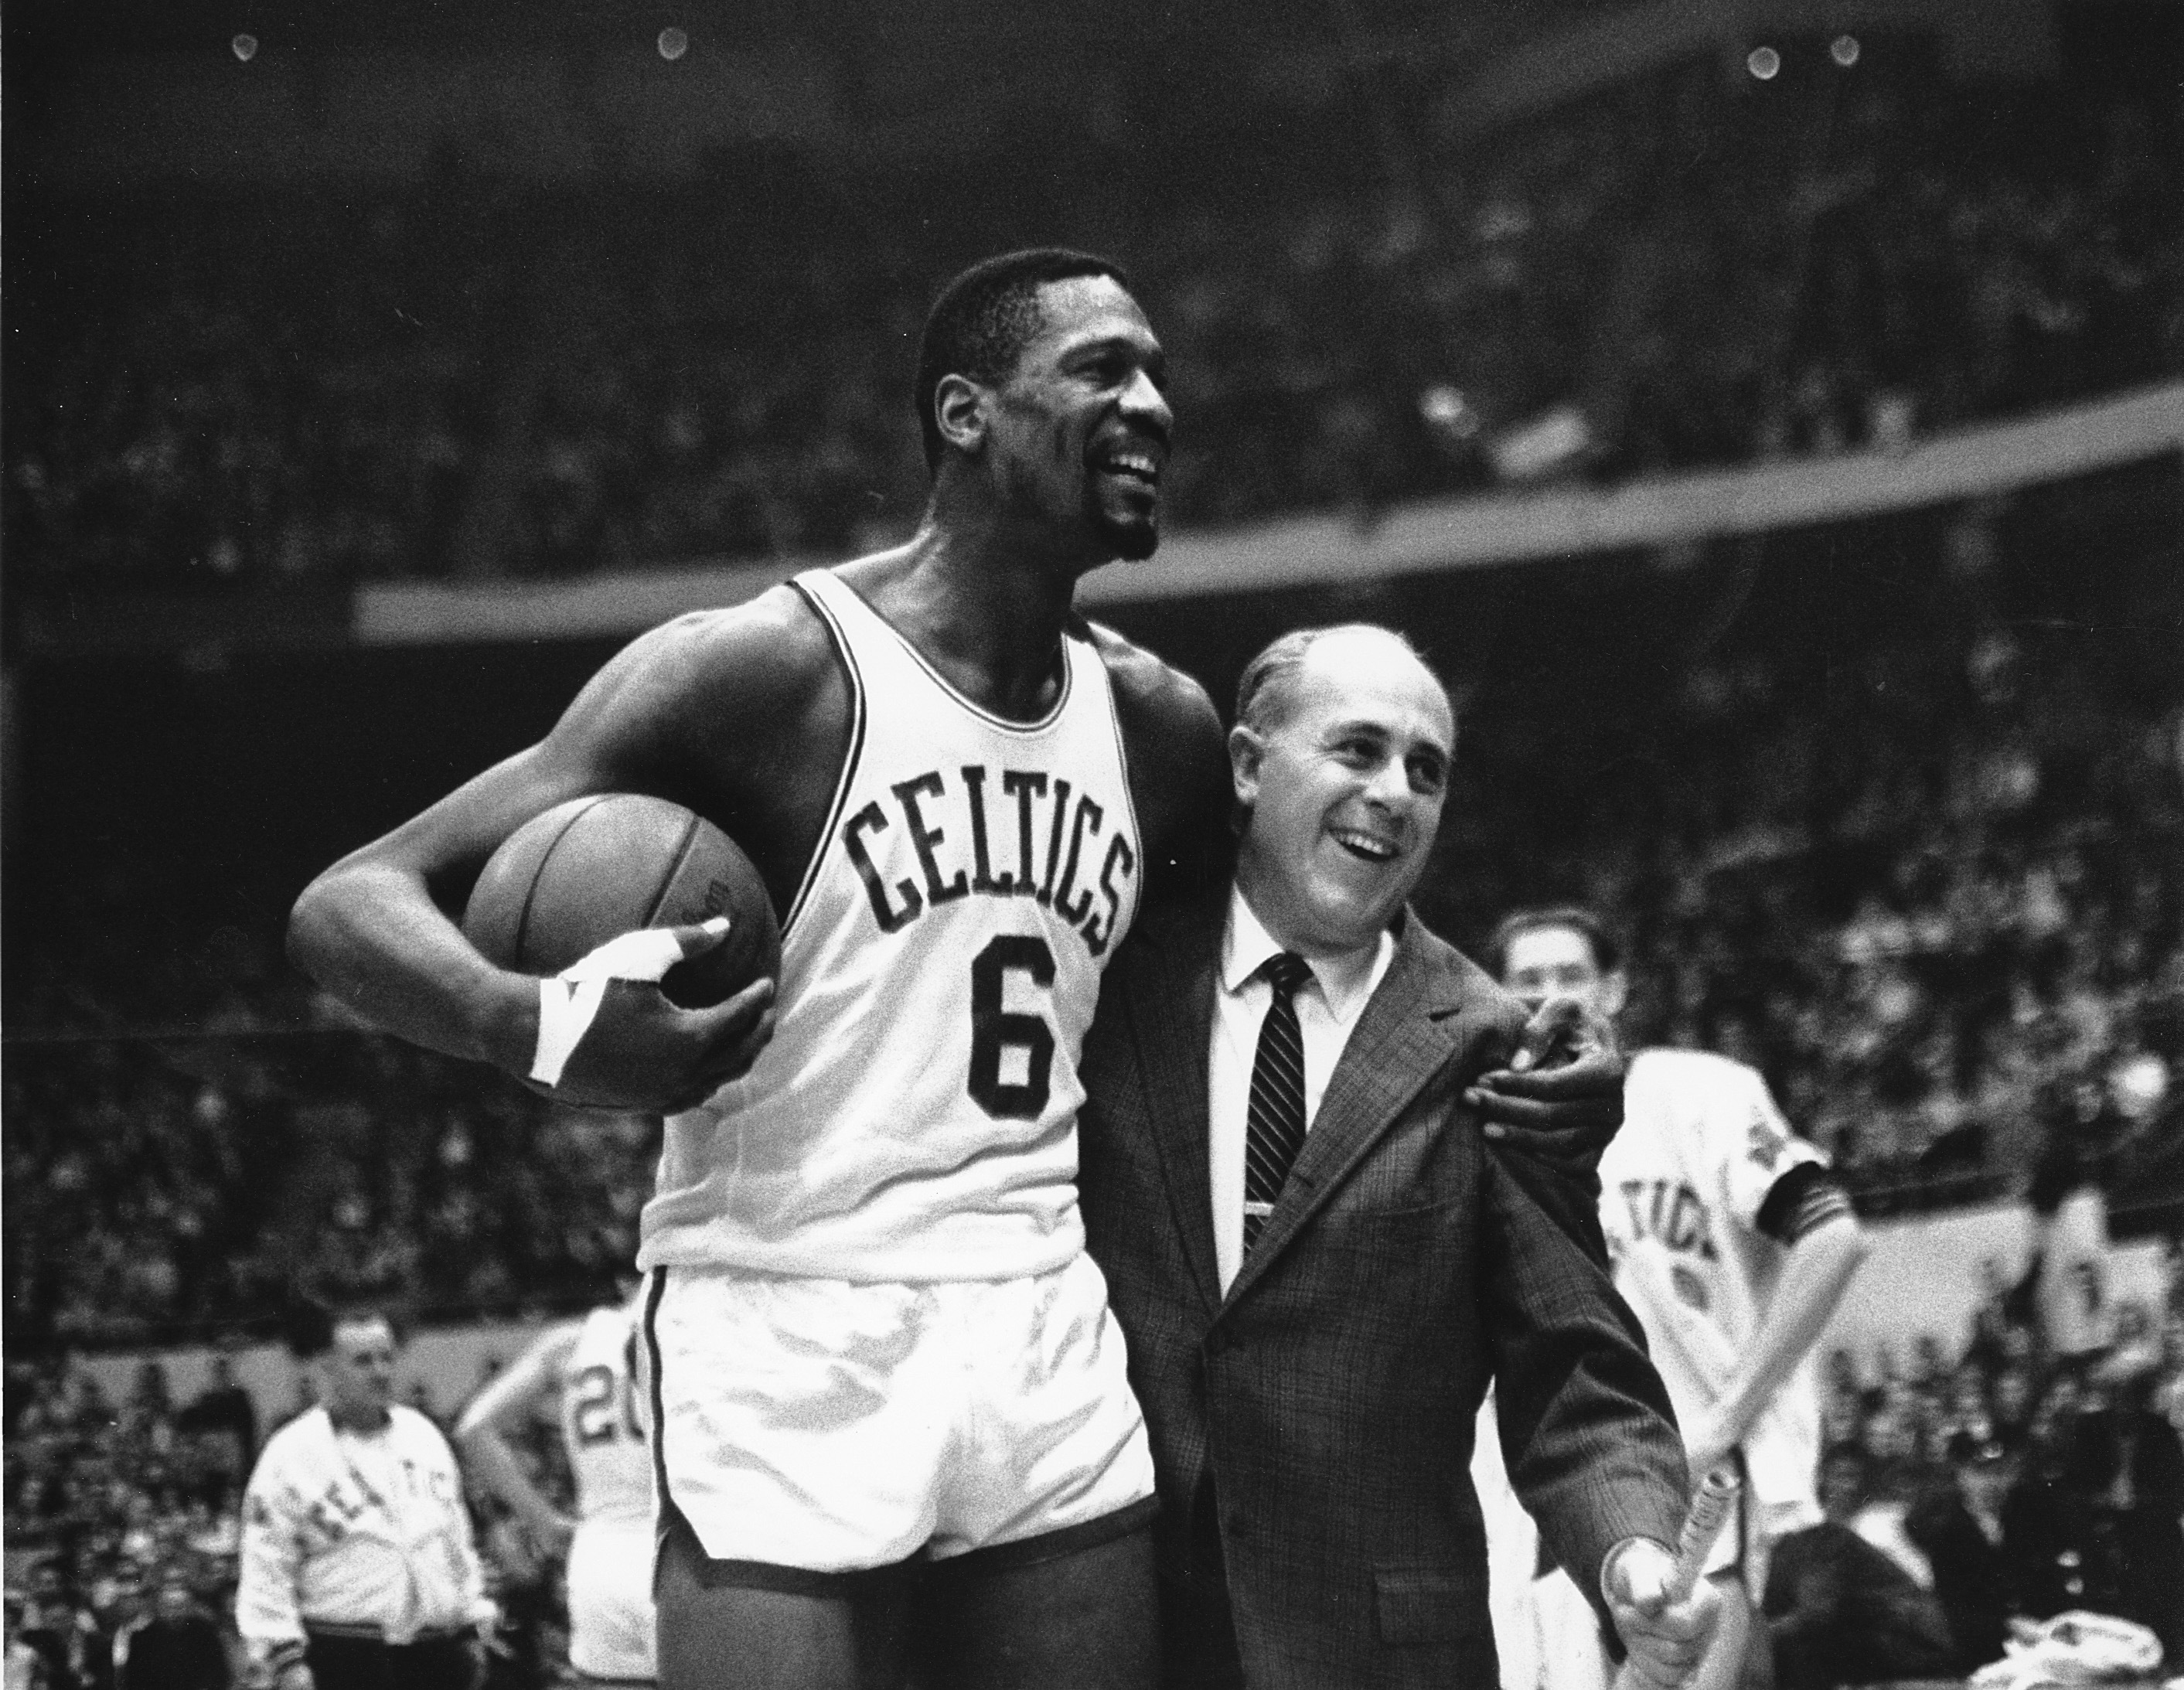 Russell con Auerbach.